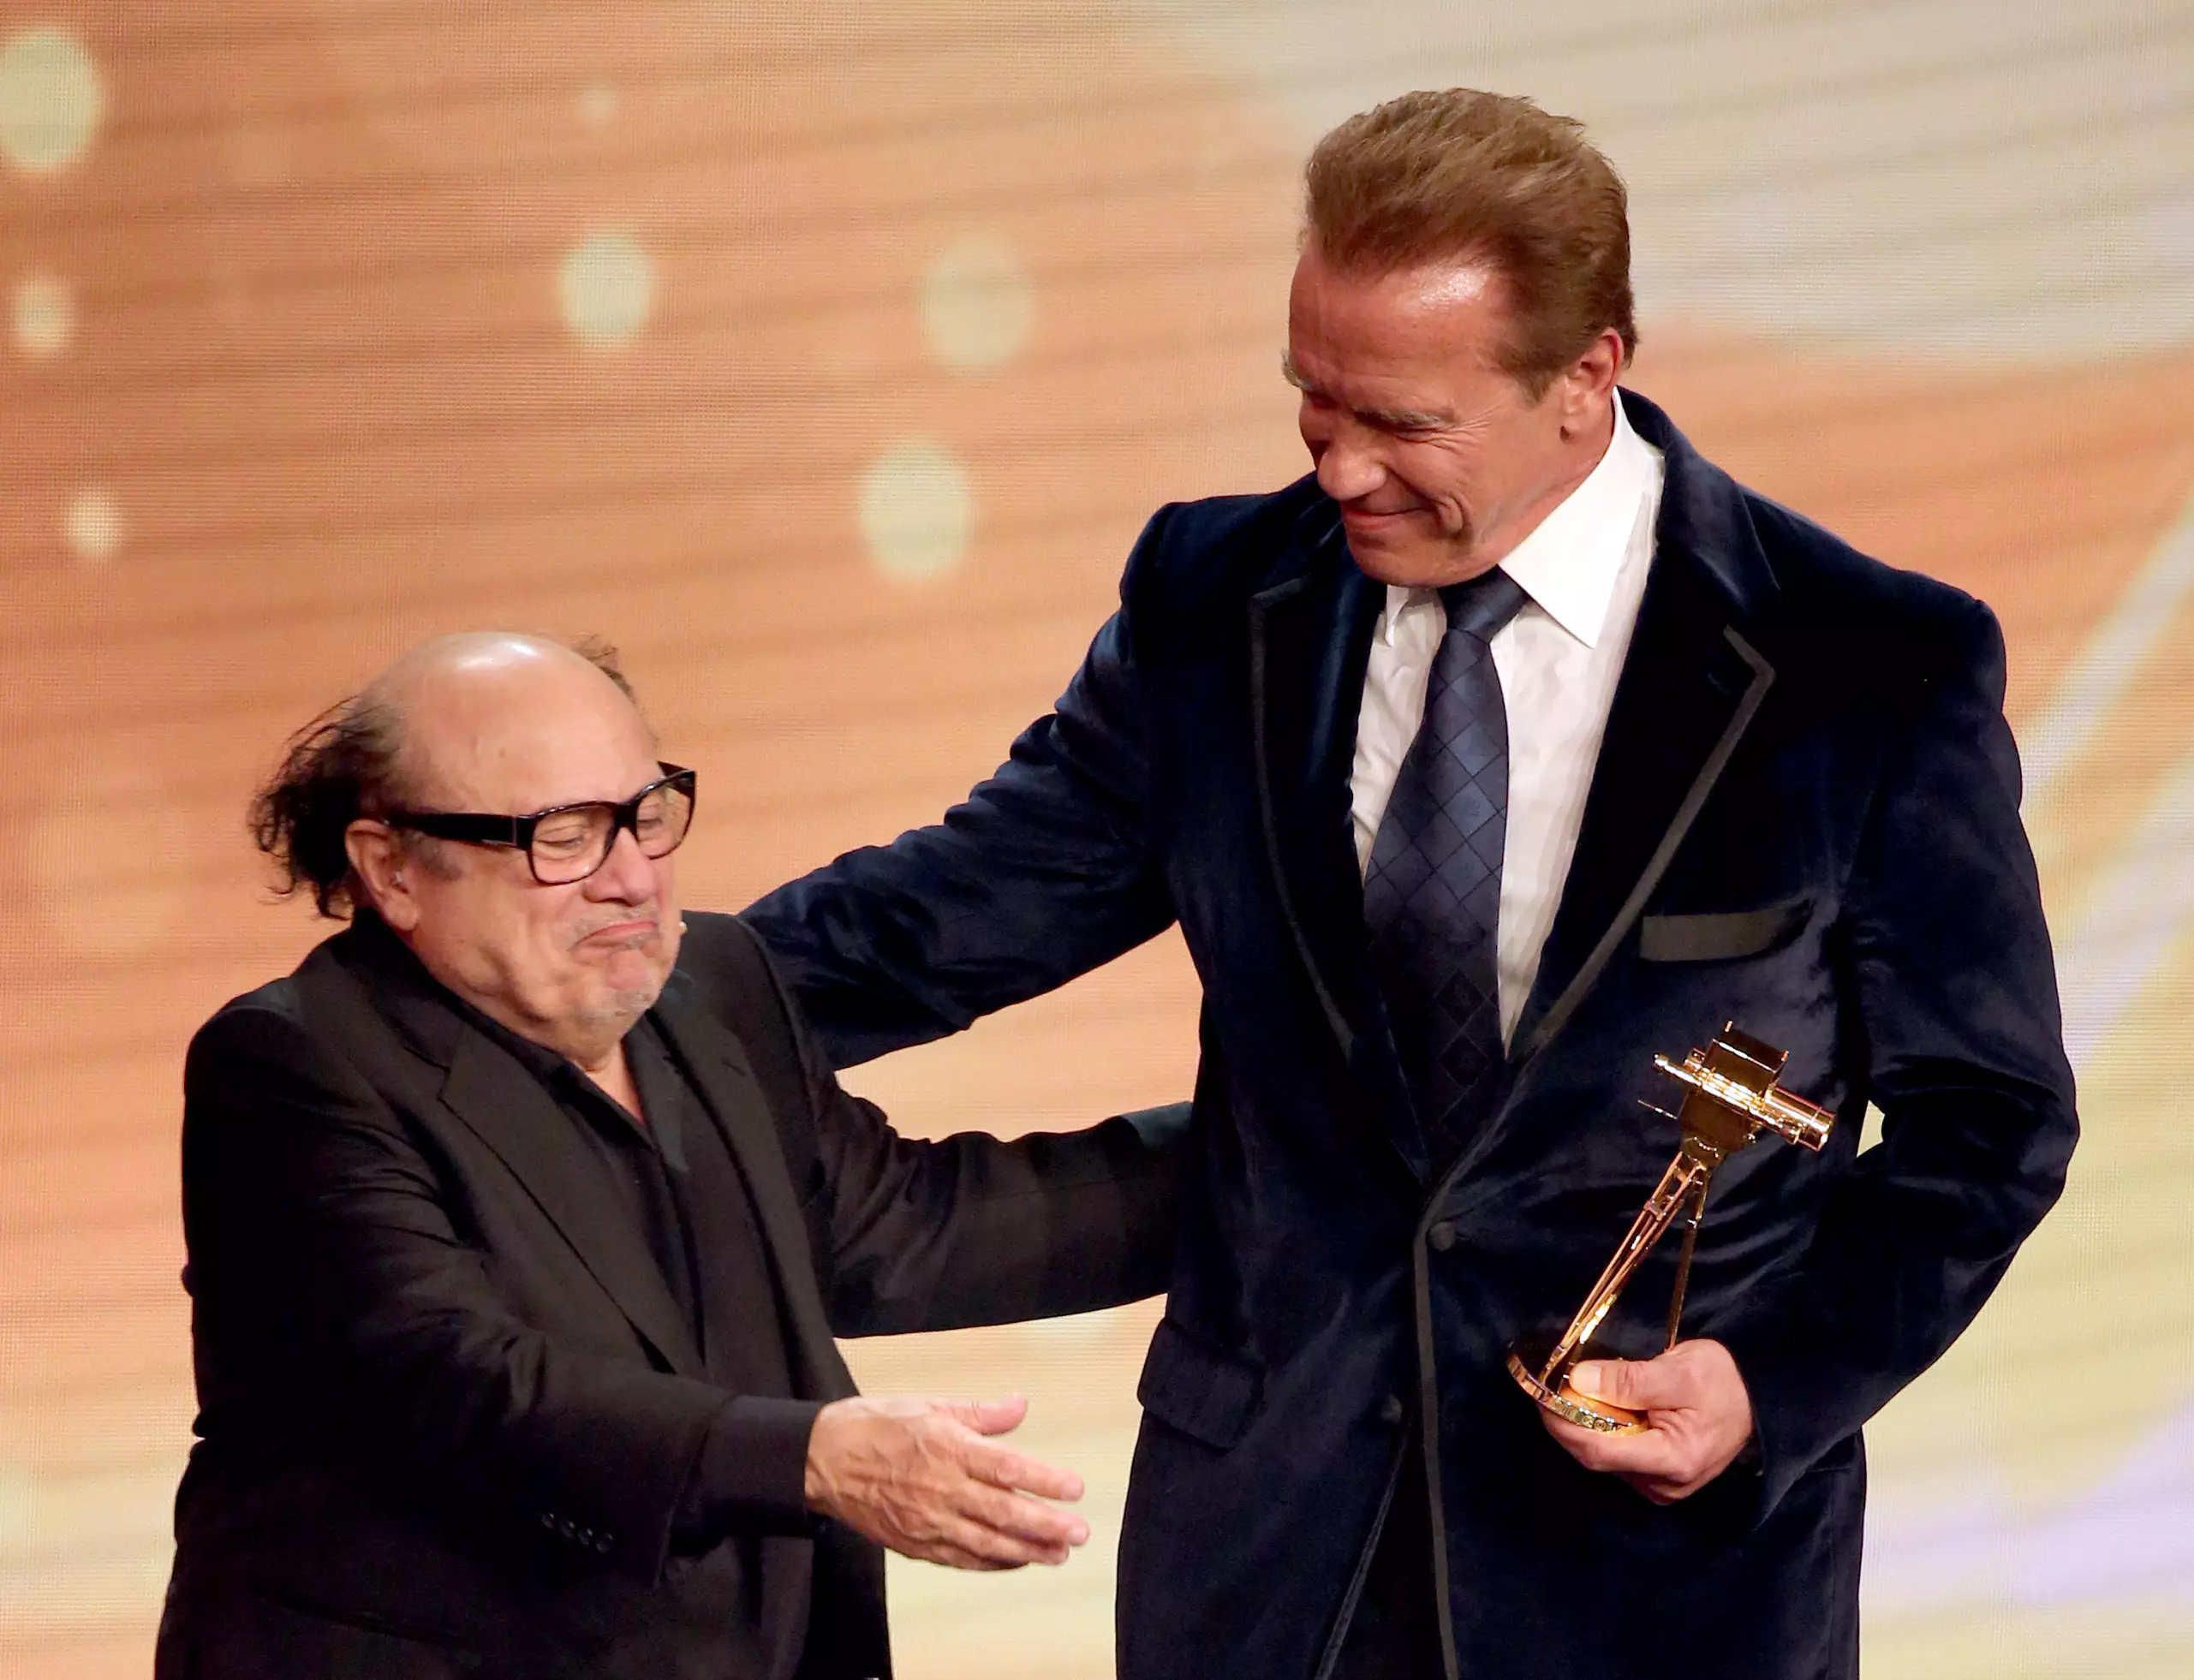 Danny DeVito and Arnold Schwarzenegger have been firm friends for years.